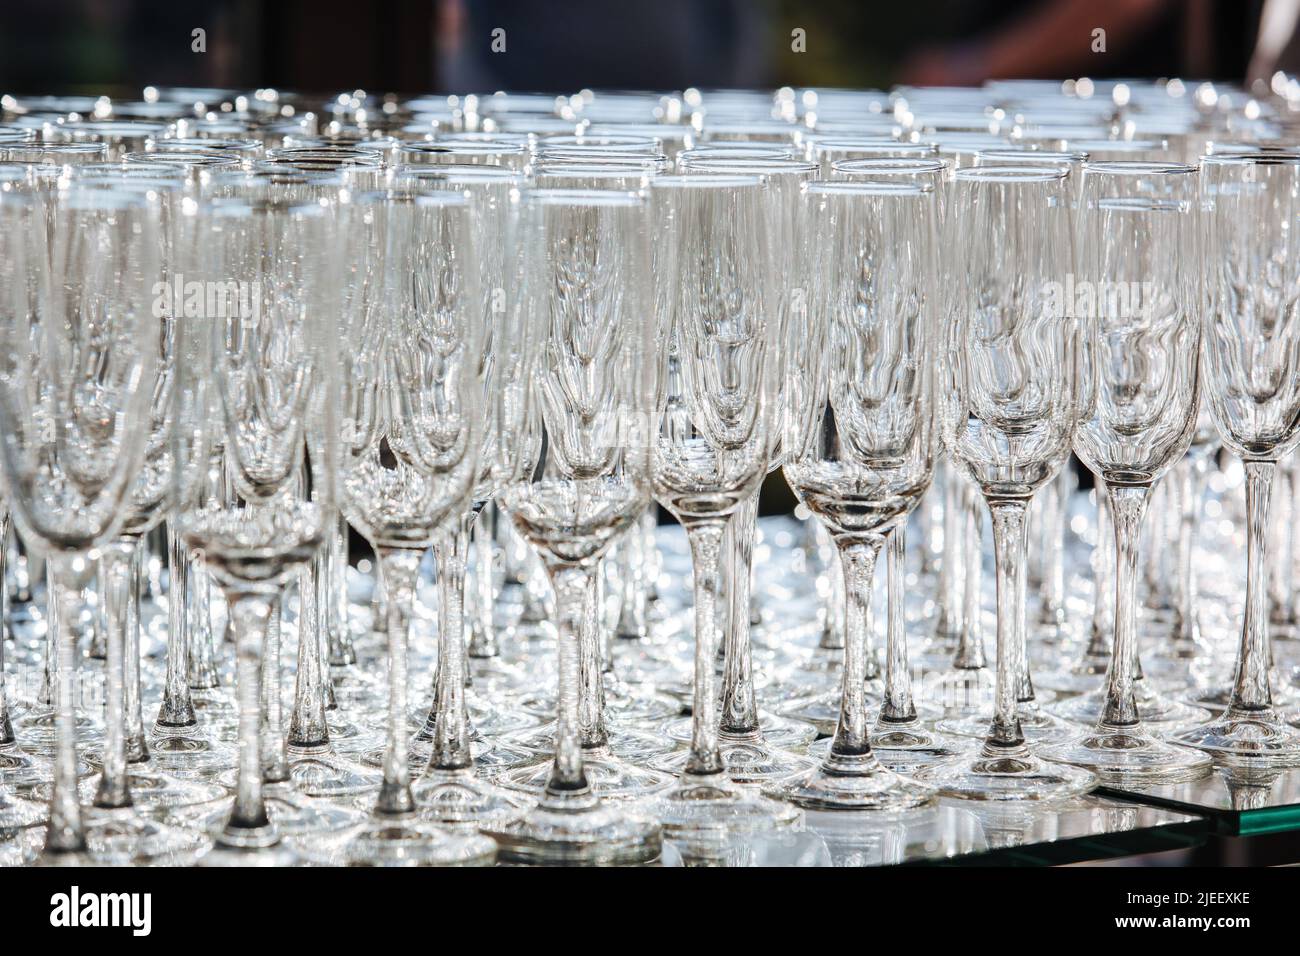 Empty glass transparent wine glasses on a table, catering background concept. Stock Photo